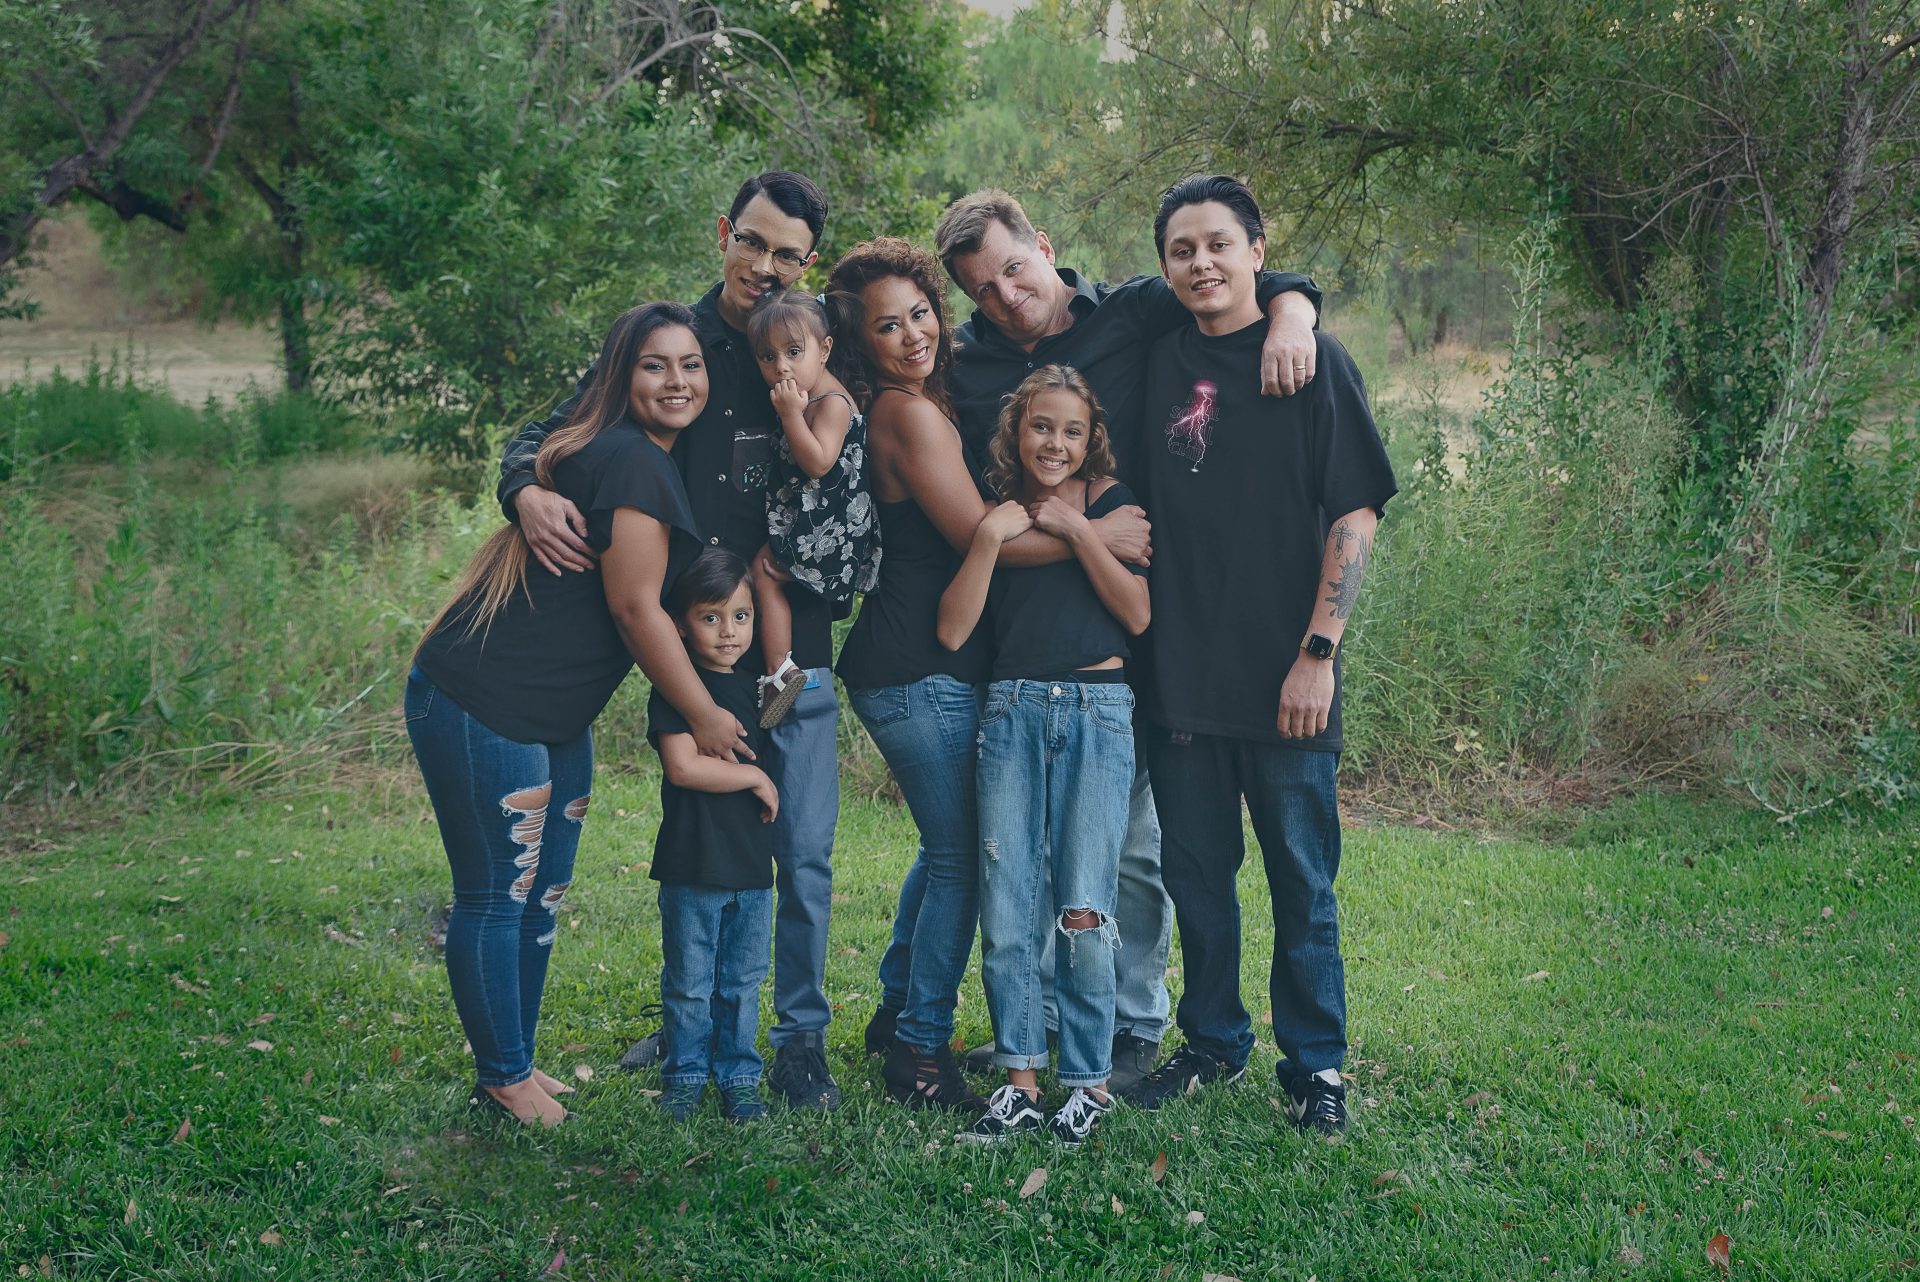 Extended family wearing jeans and black tops in park | Family photography san diego | Visit www.babiesandbeauties.com